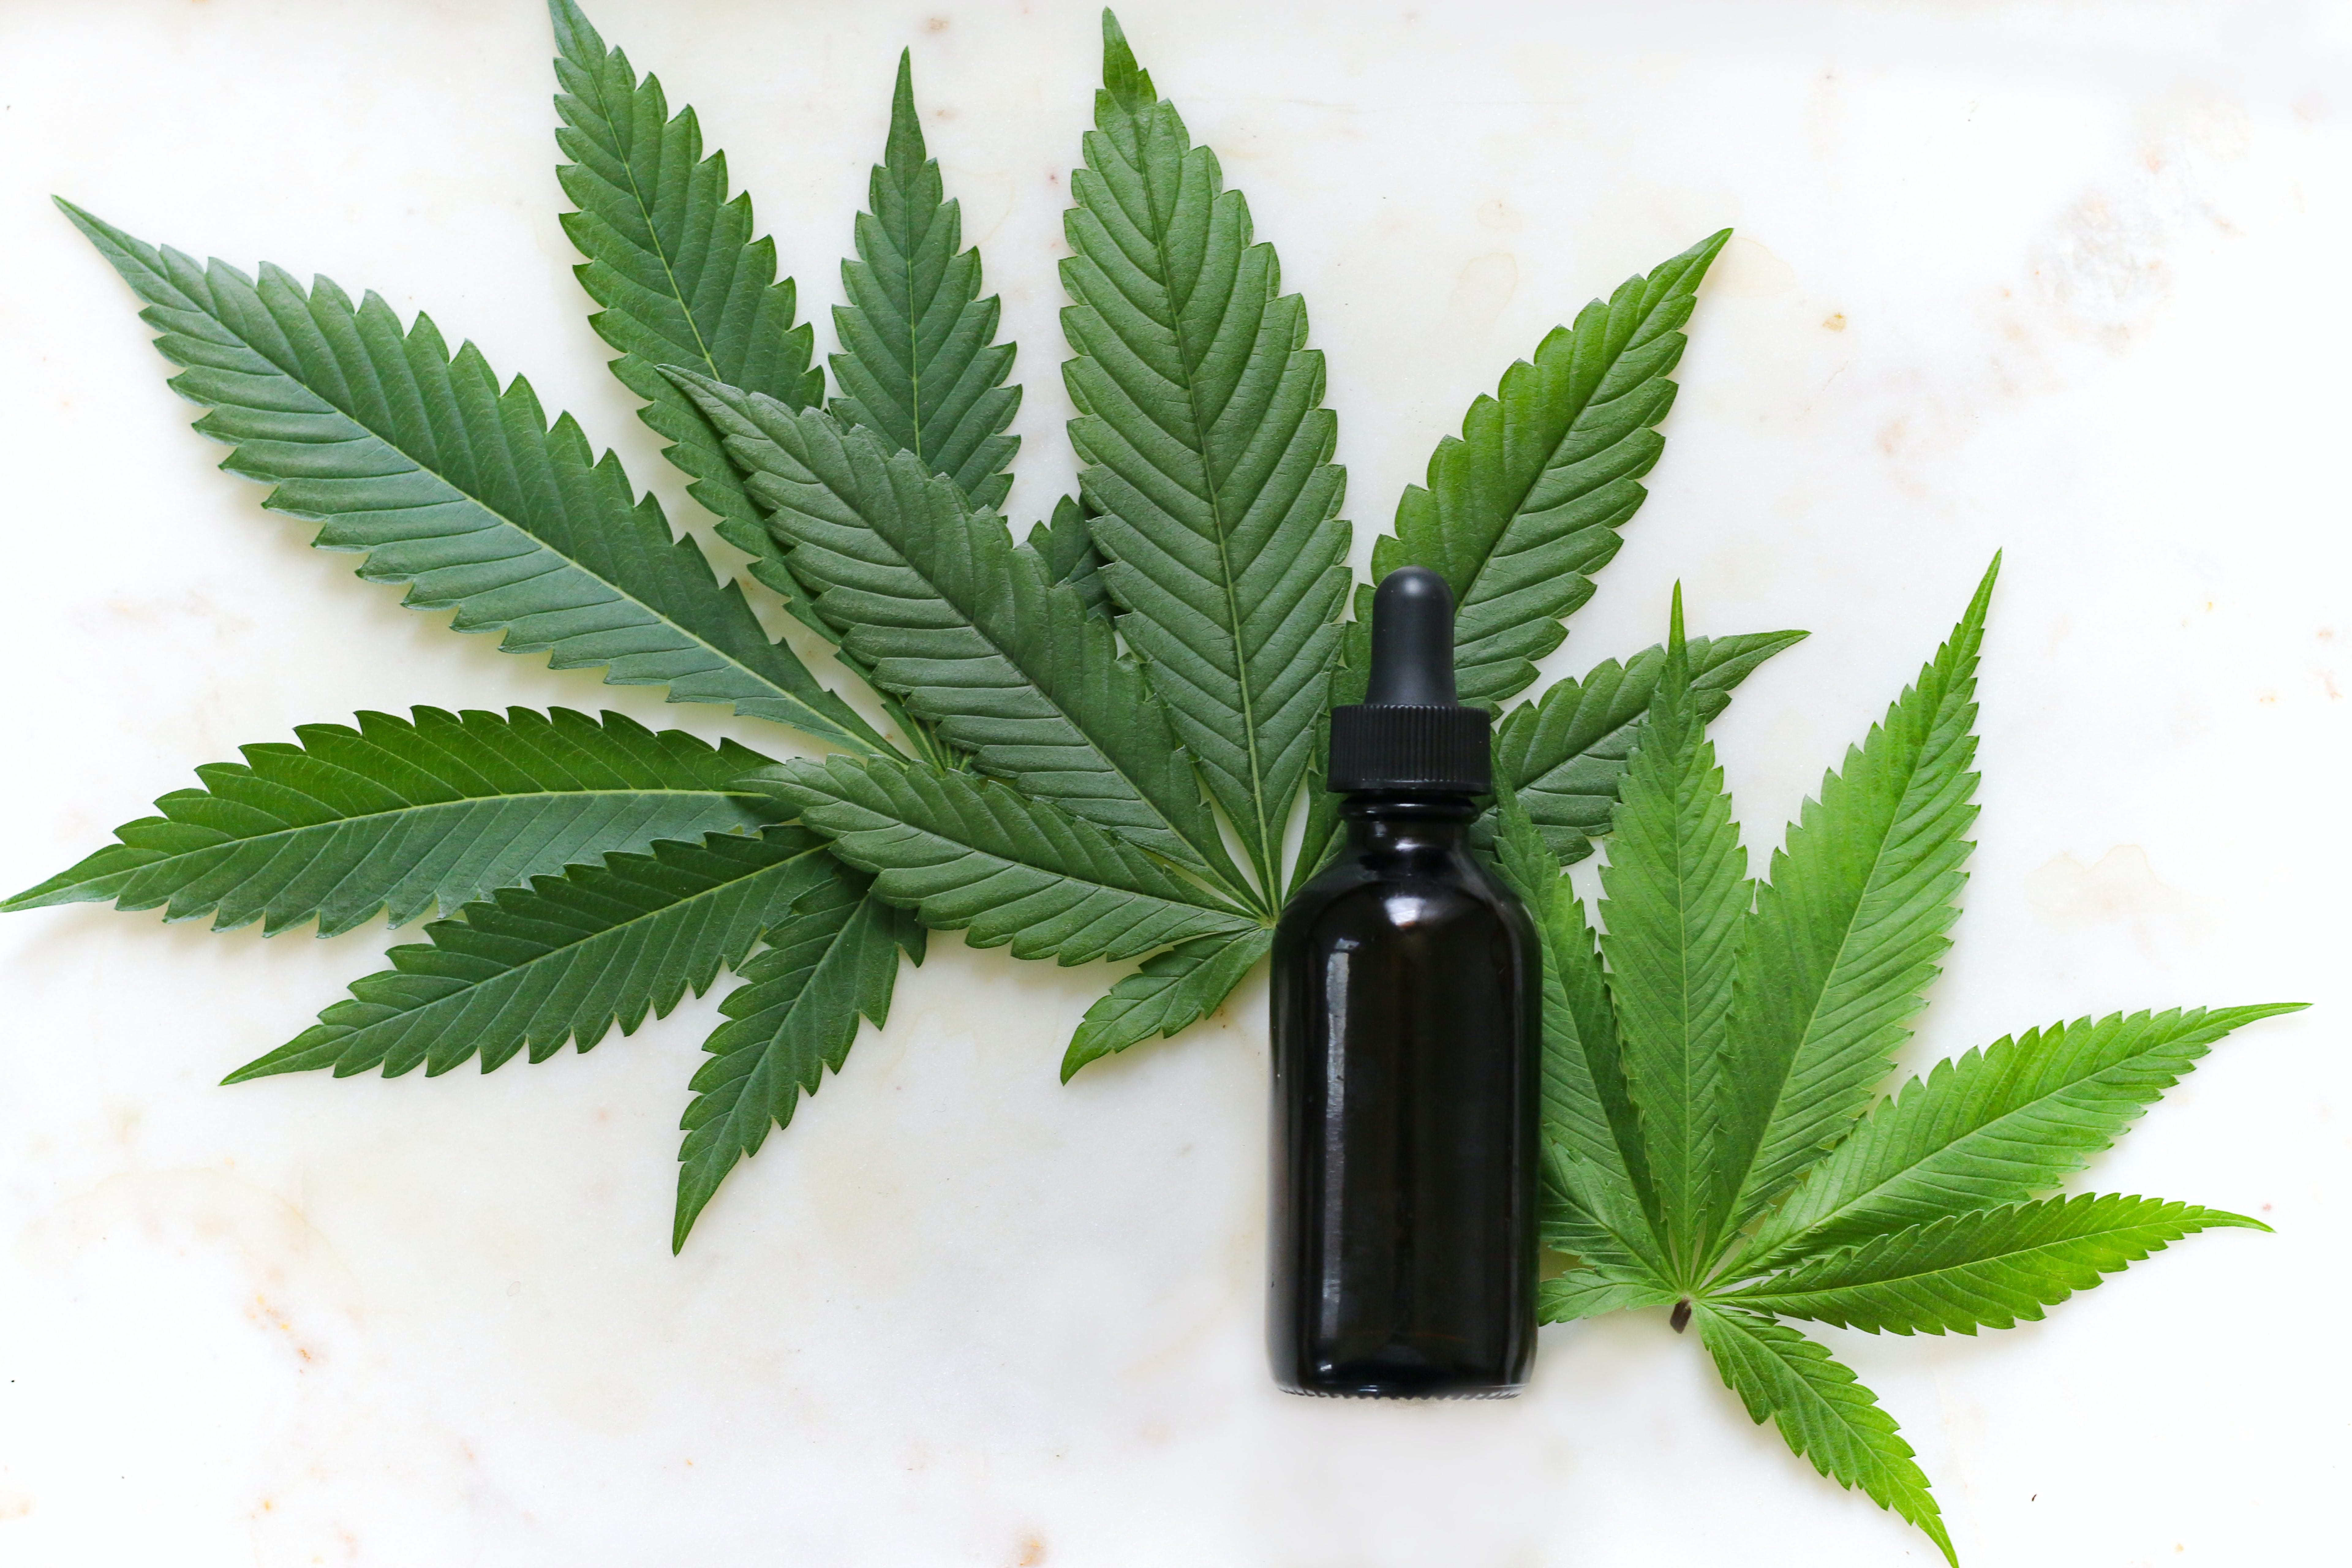 New CBD &amp; THC Cannabis Oils Now Shipping To Australia From Canada